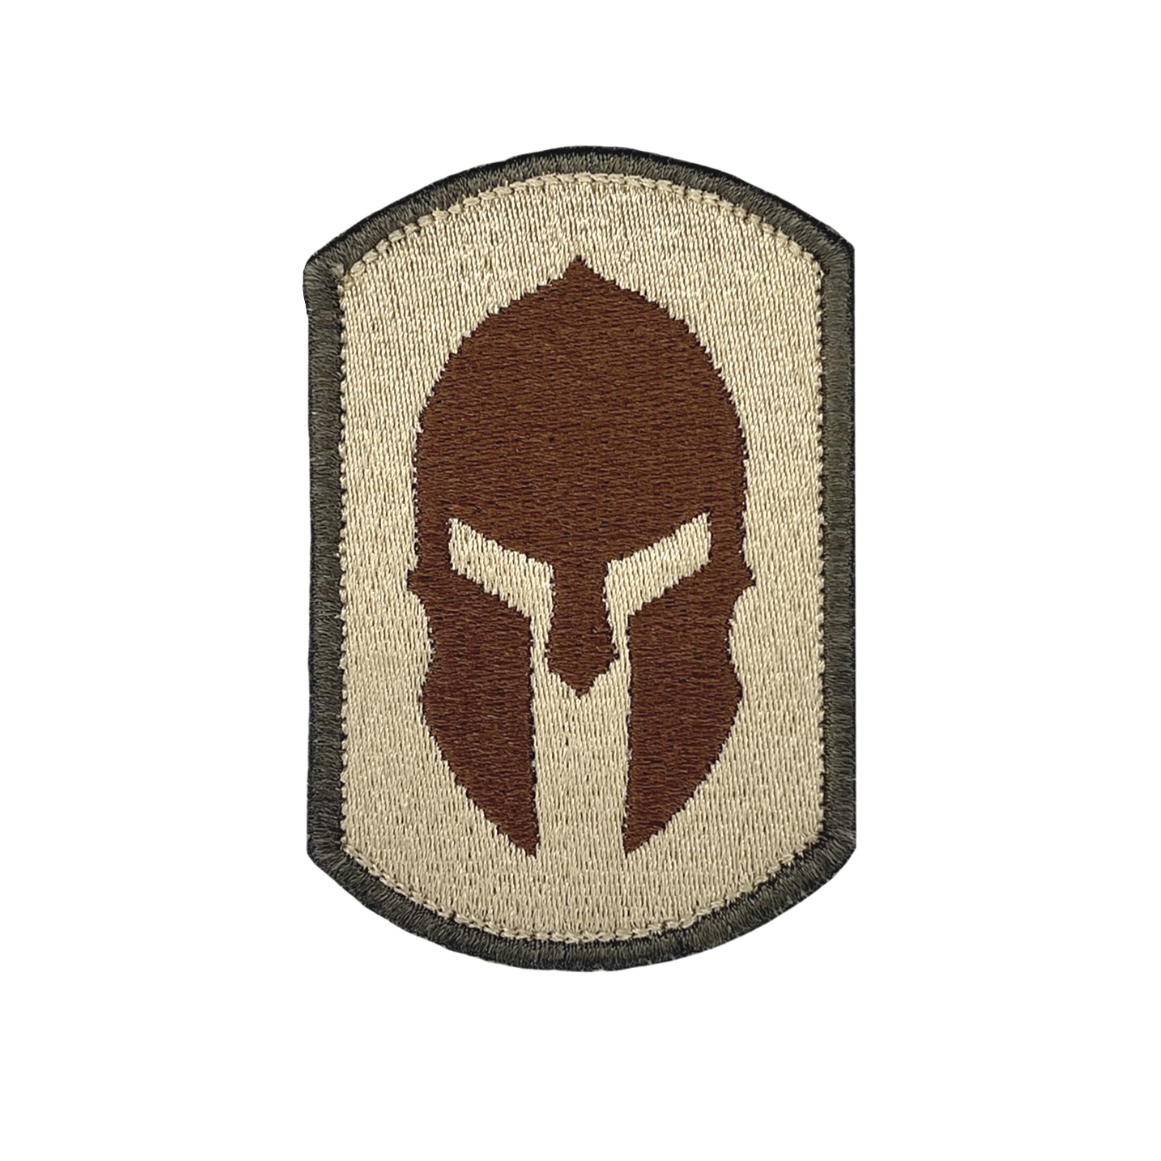 Molon Labe Spartan Hook and Loop patch. 100% embroidered. 2 inches wide, 3 inches tall. The spartan helmet is brown with a khaki background and olive drab border. Great for backpacks, hats, gun bags, plate carriers, dog vests, and more. Made in USA.